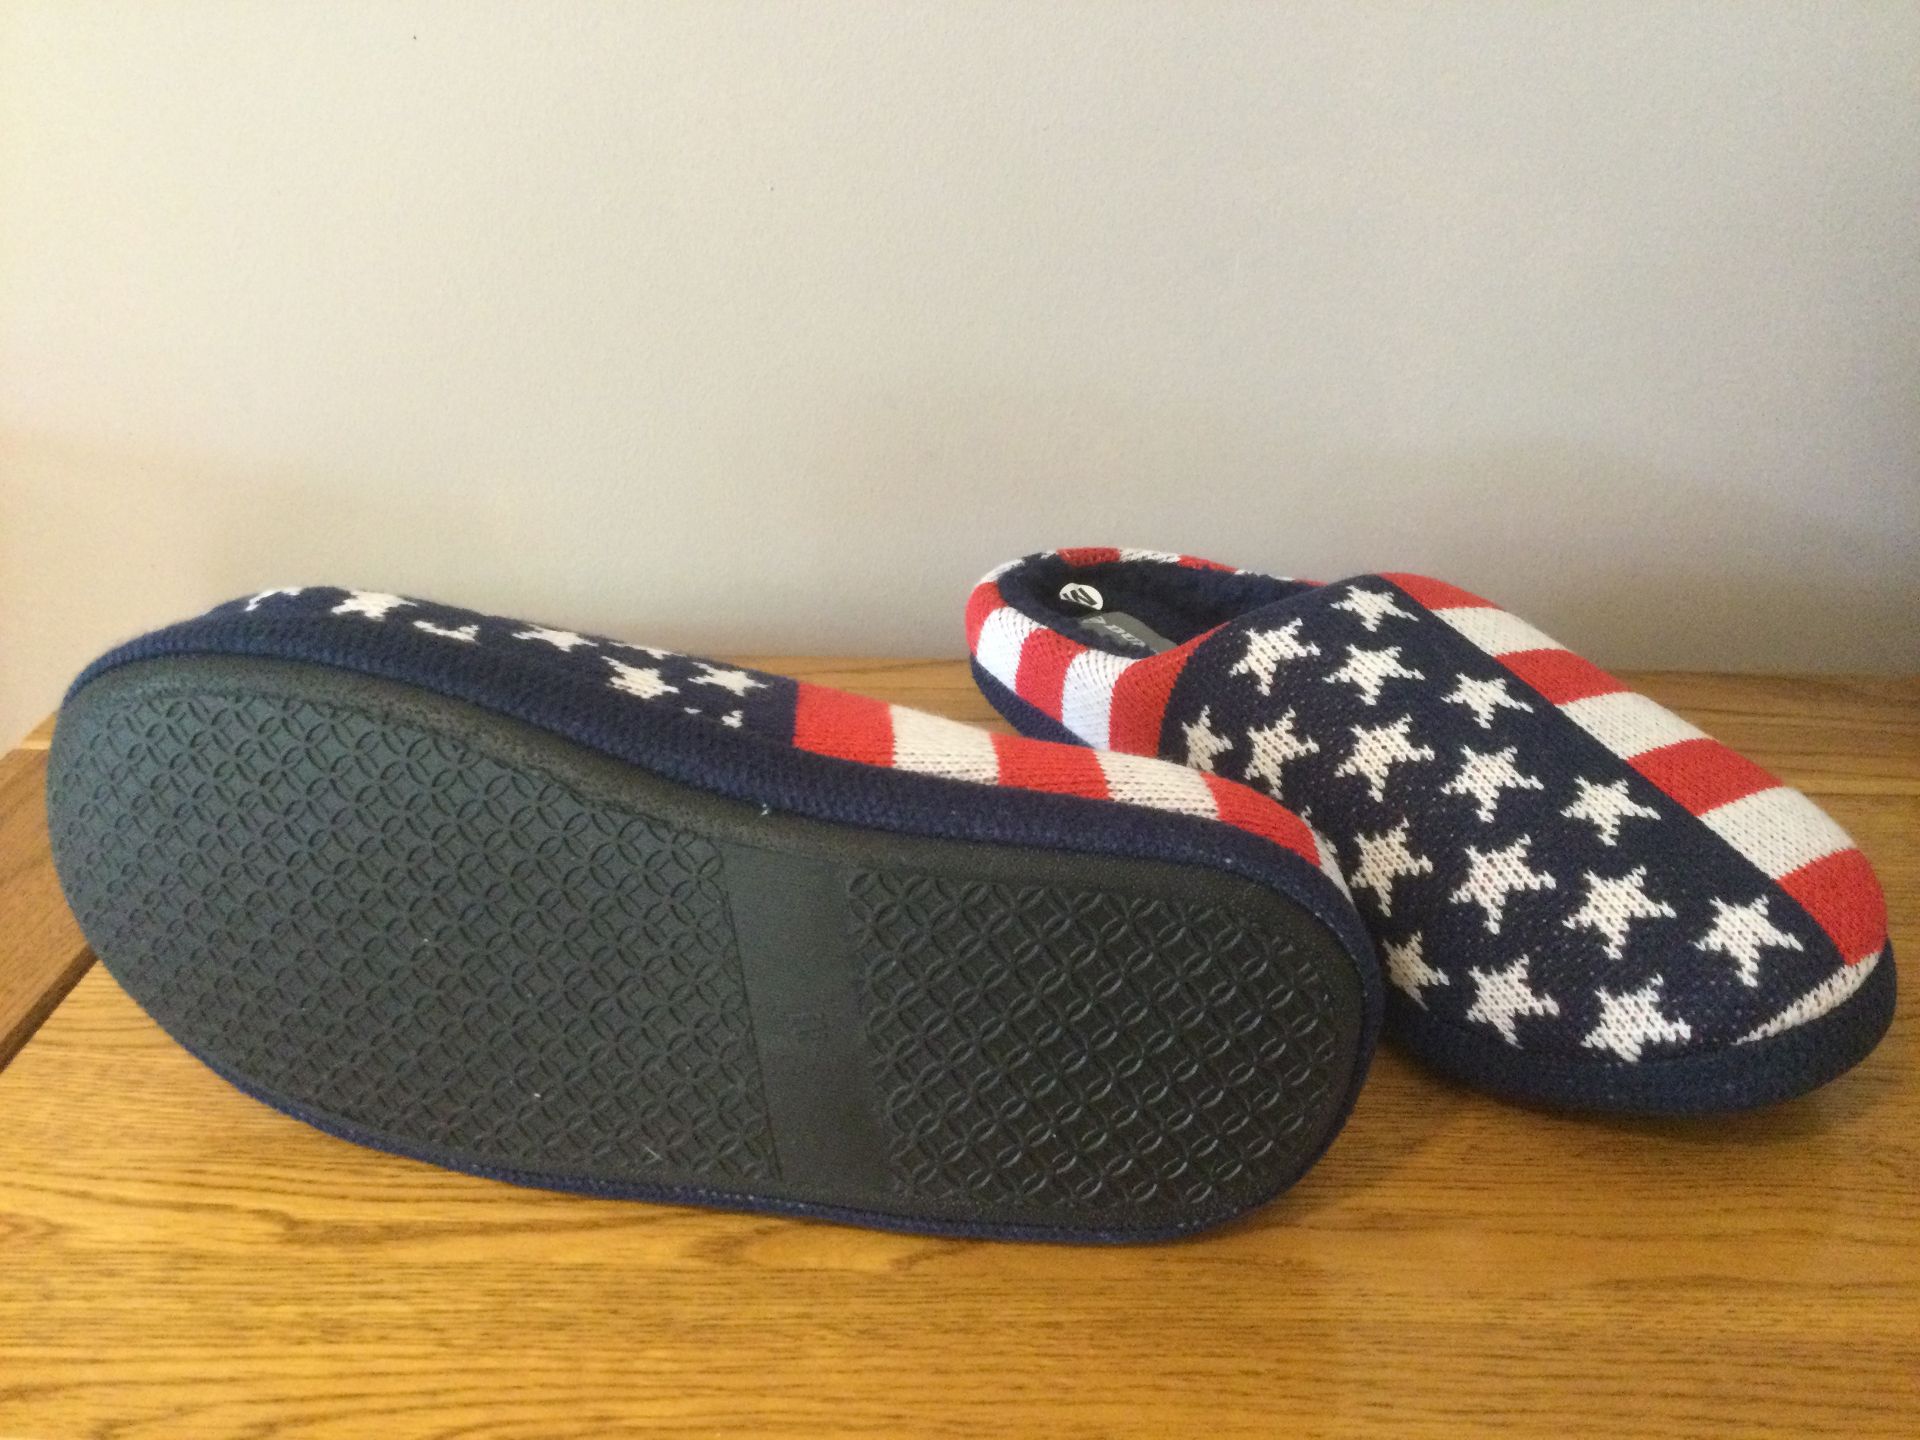 Job Lot 10 x Men's Dunlop, “USA Stars and Stripes” Memory Foam, Mule Slippers, Size M (8/9) - Image 4 of 7